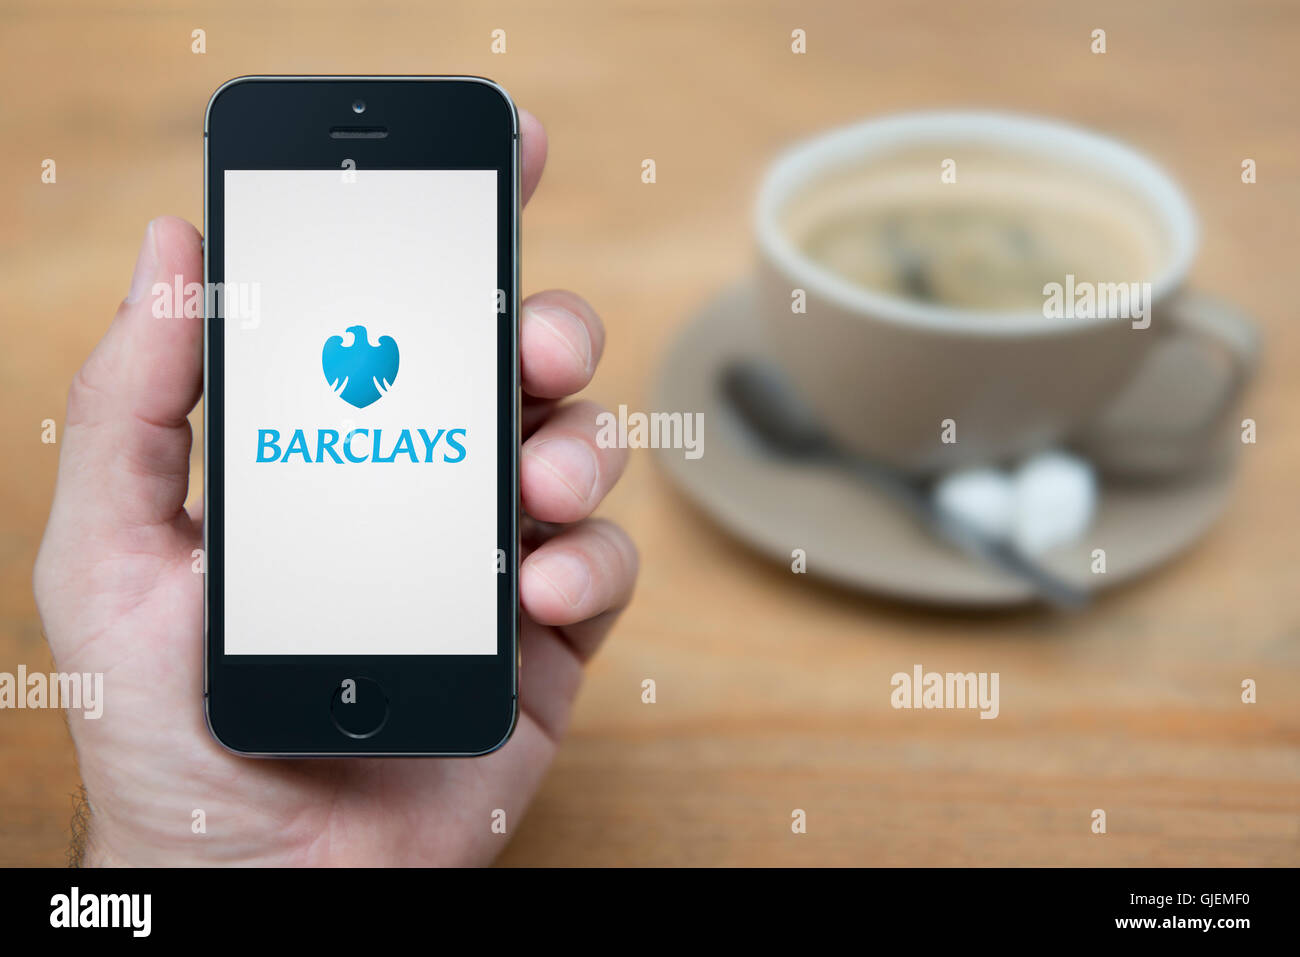 A man looks at his iPhone which displays the Barclays bank logo, while sat with a cup of coffee (Editorial use only). Stock Photo